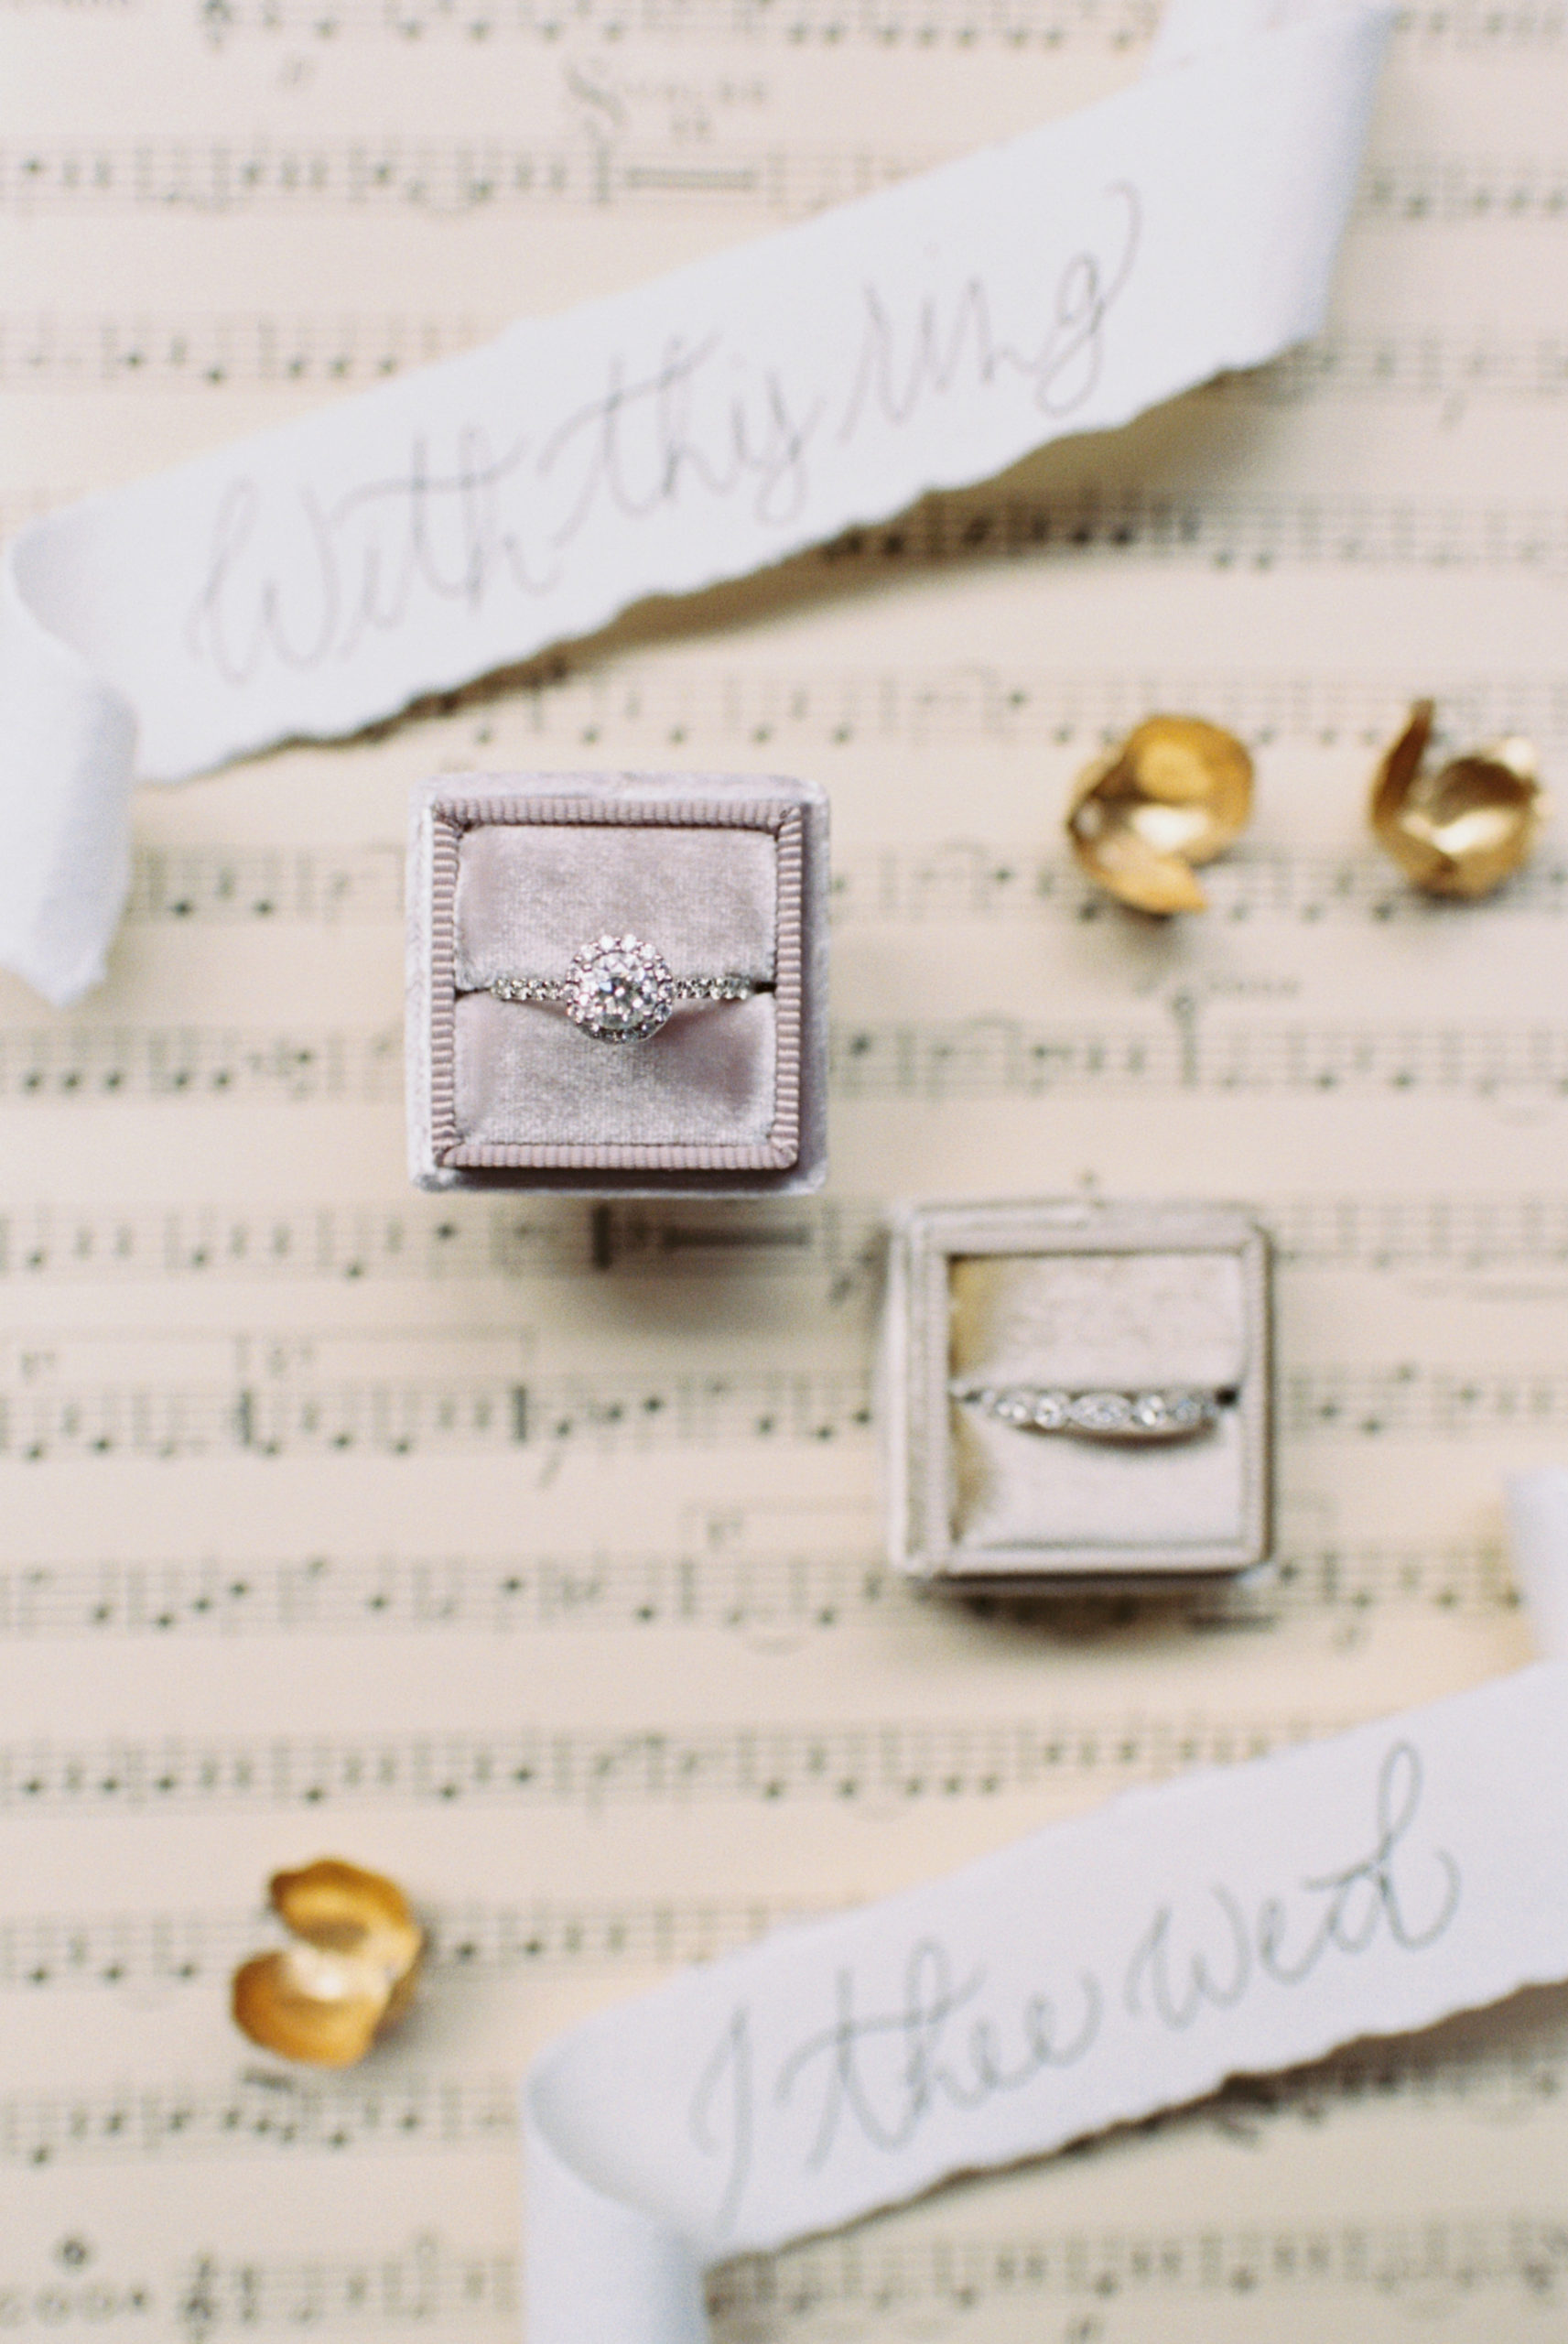 engagement ring care to keep your ring photo ready on your wedding day